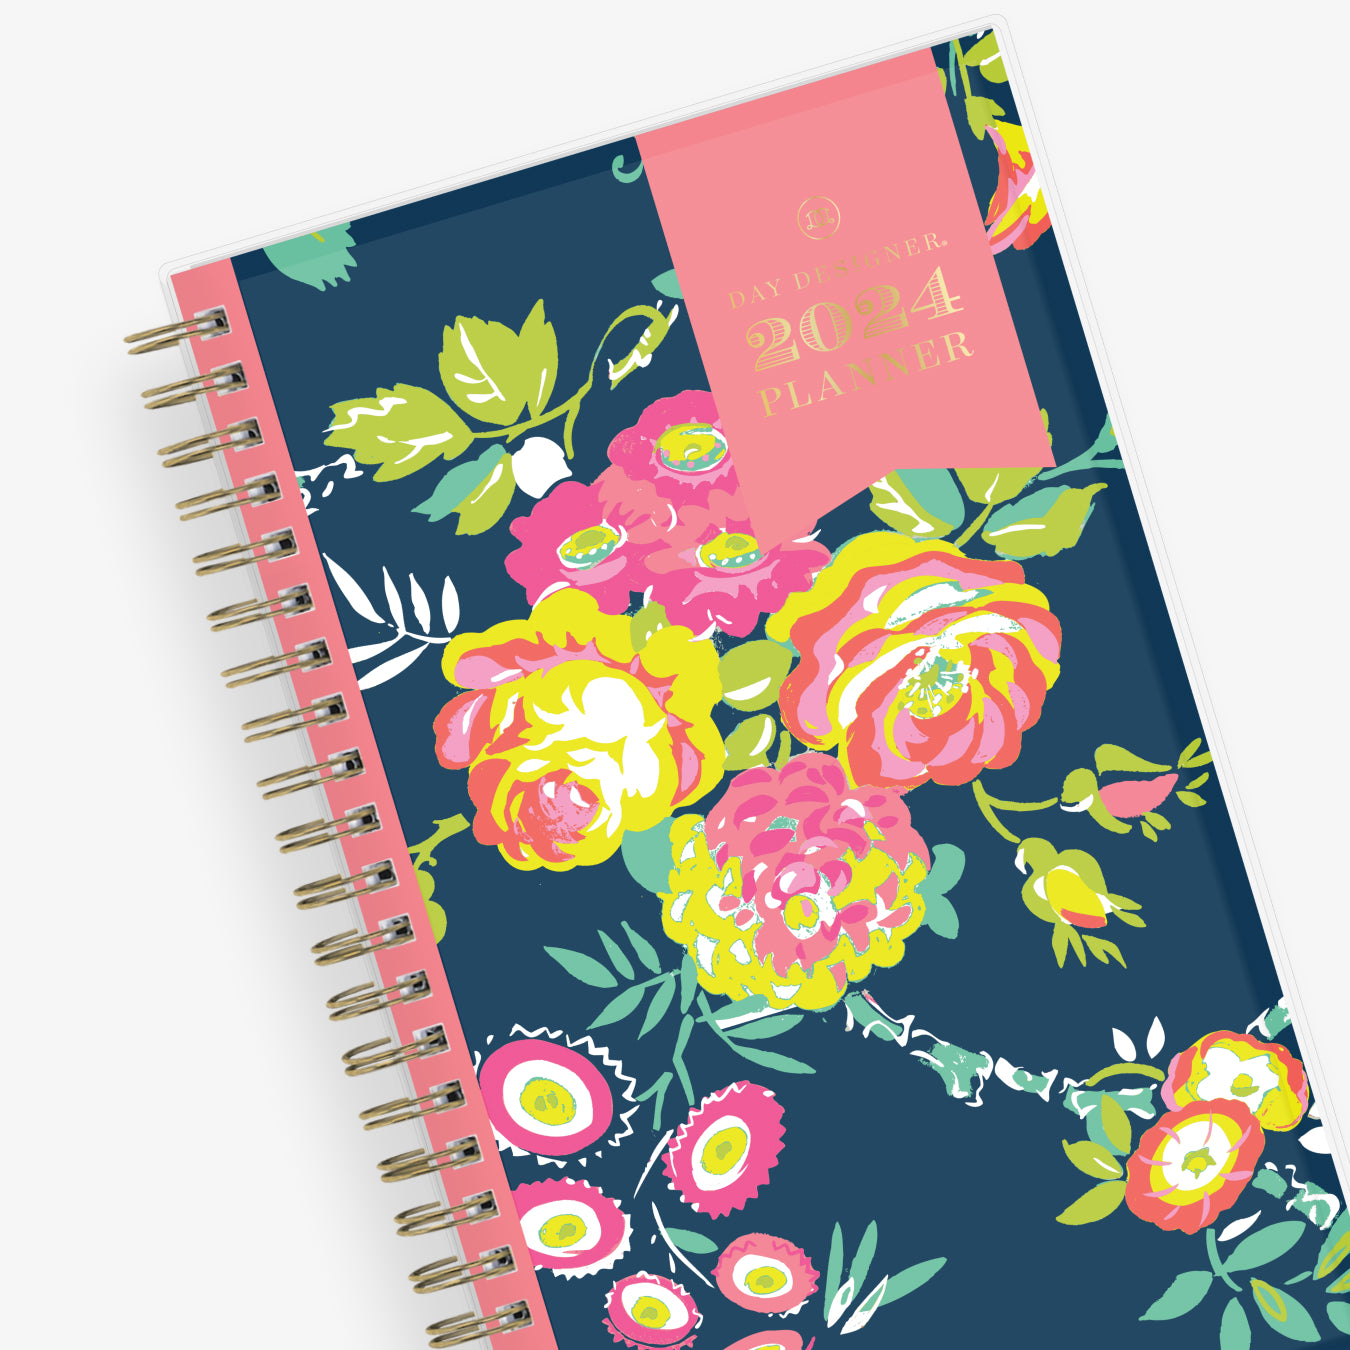 FLORAL DIARY WITH GOLD BINDER RINGS